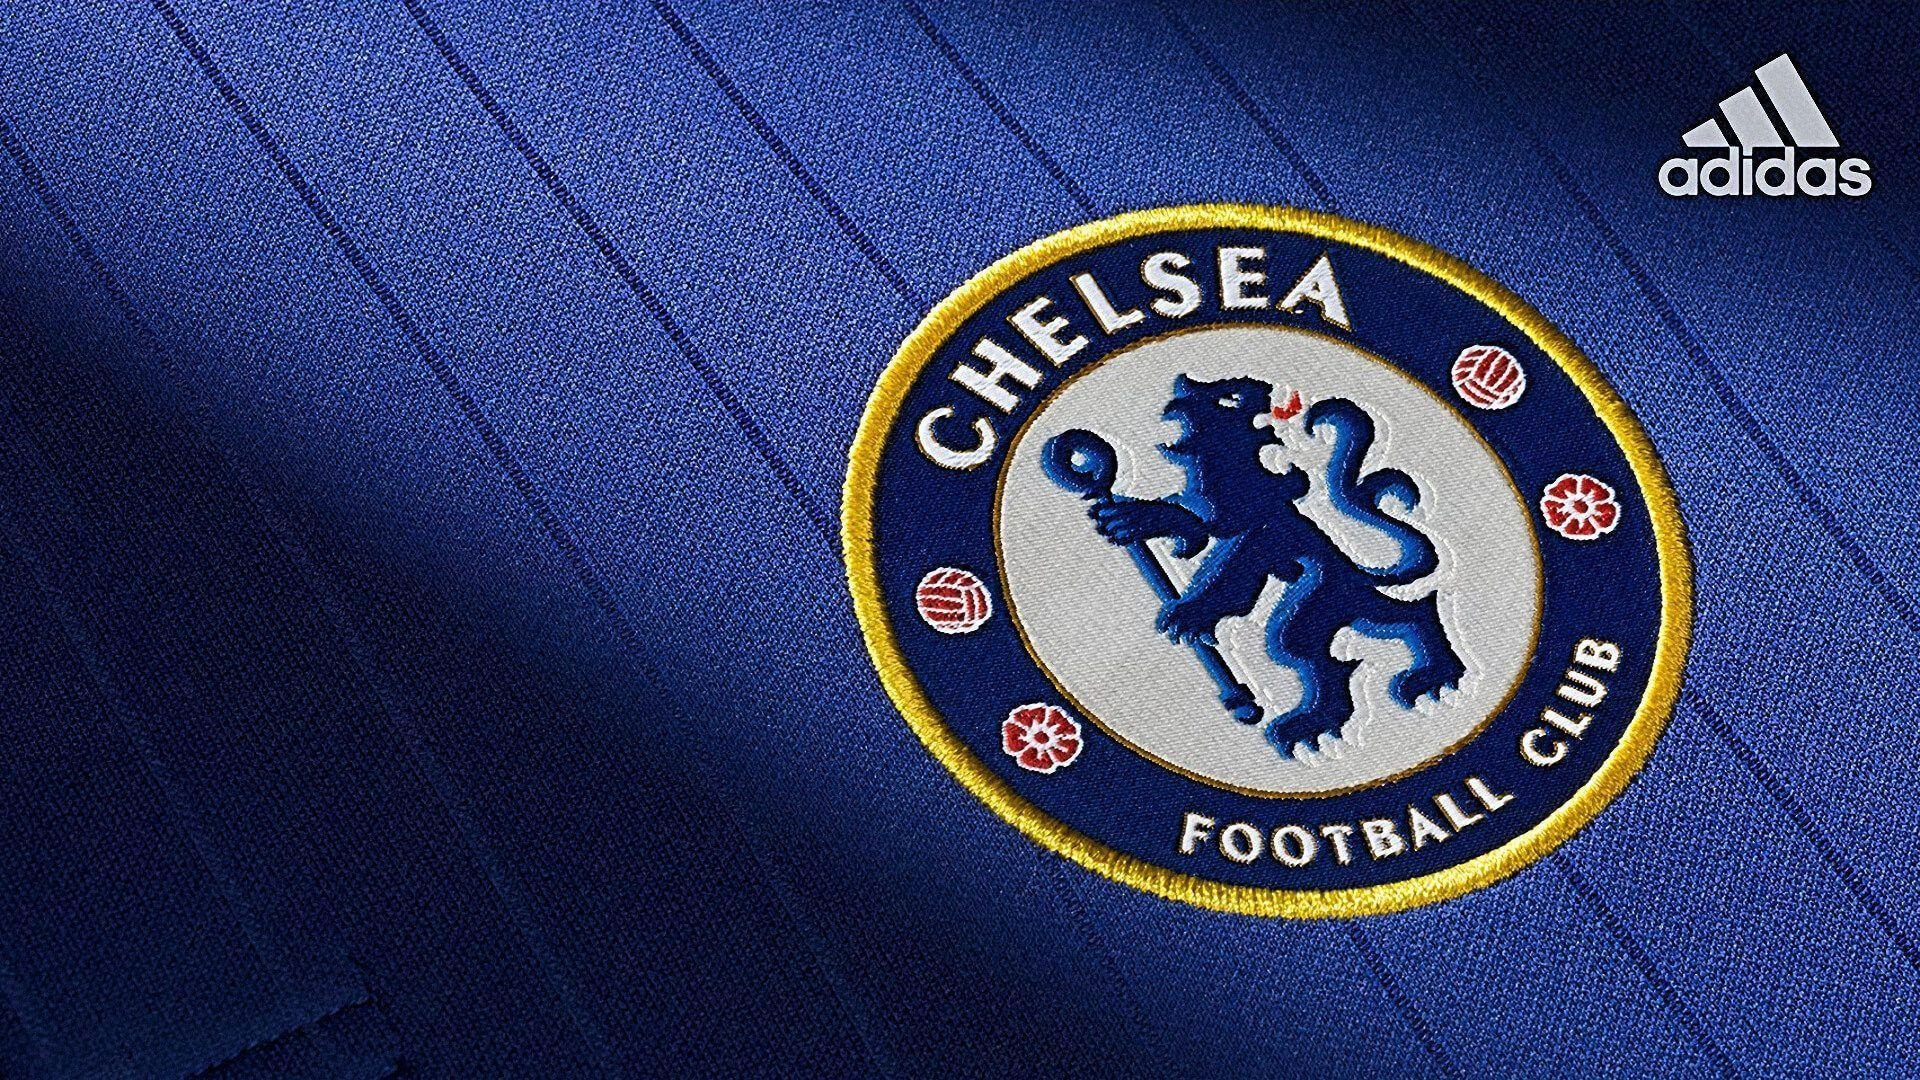 Chelsea: The club has rivalries with neighboring teams Arsenal and Tottenham Hotspur. 1920x1080 Full HD Wallpaper.